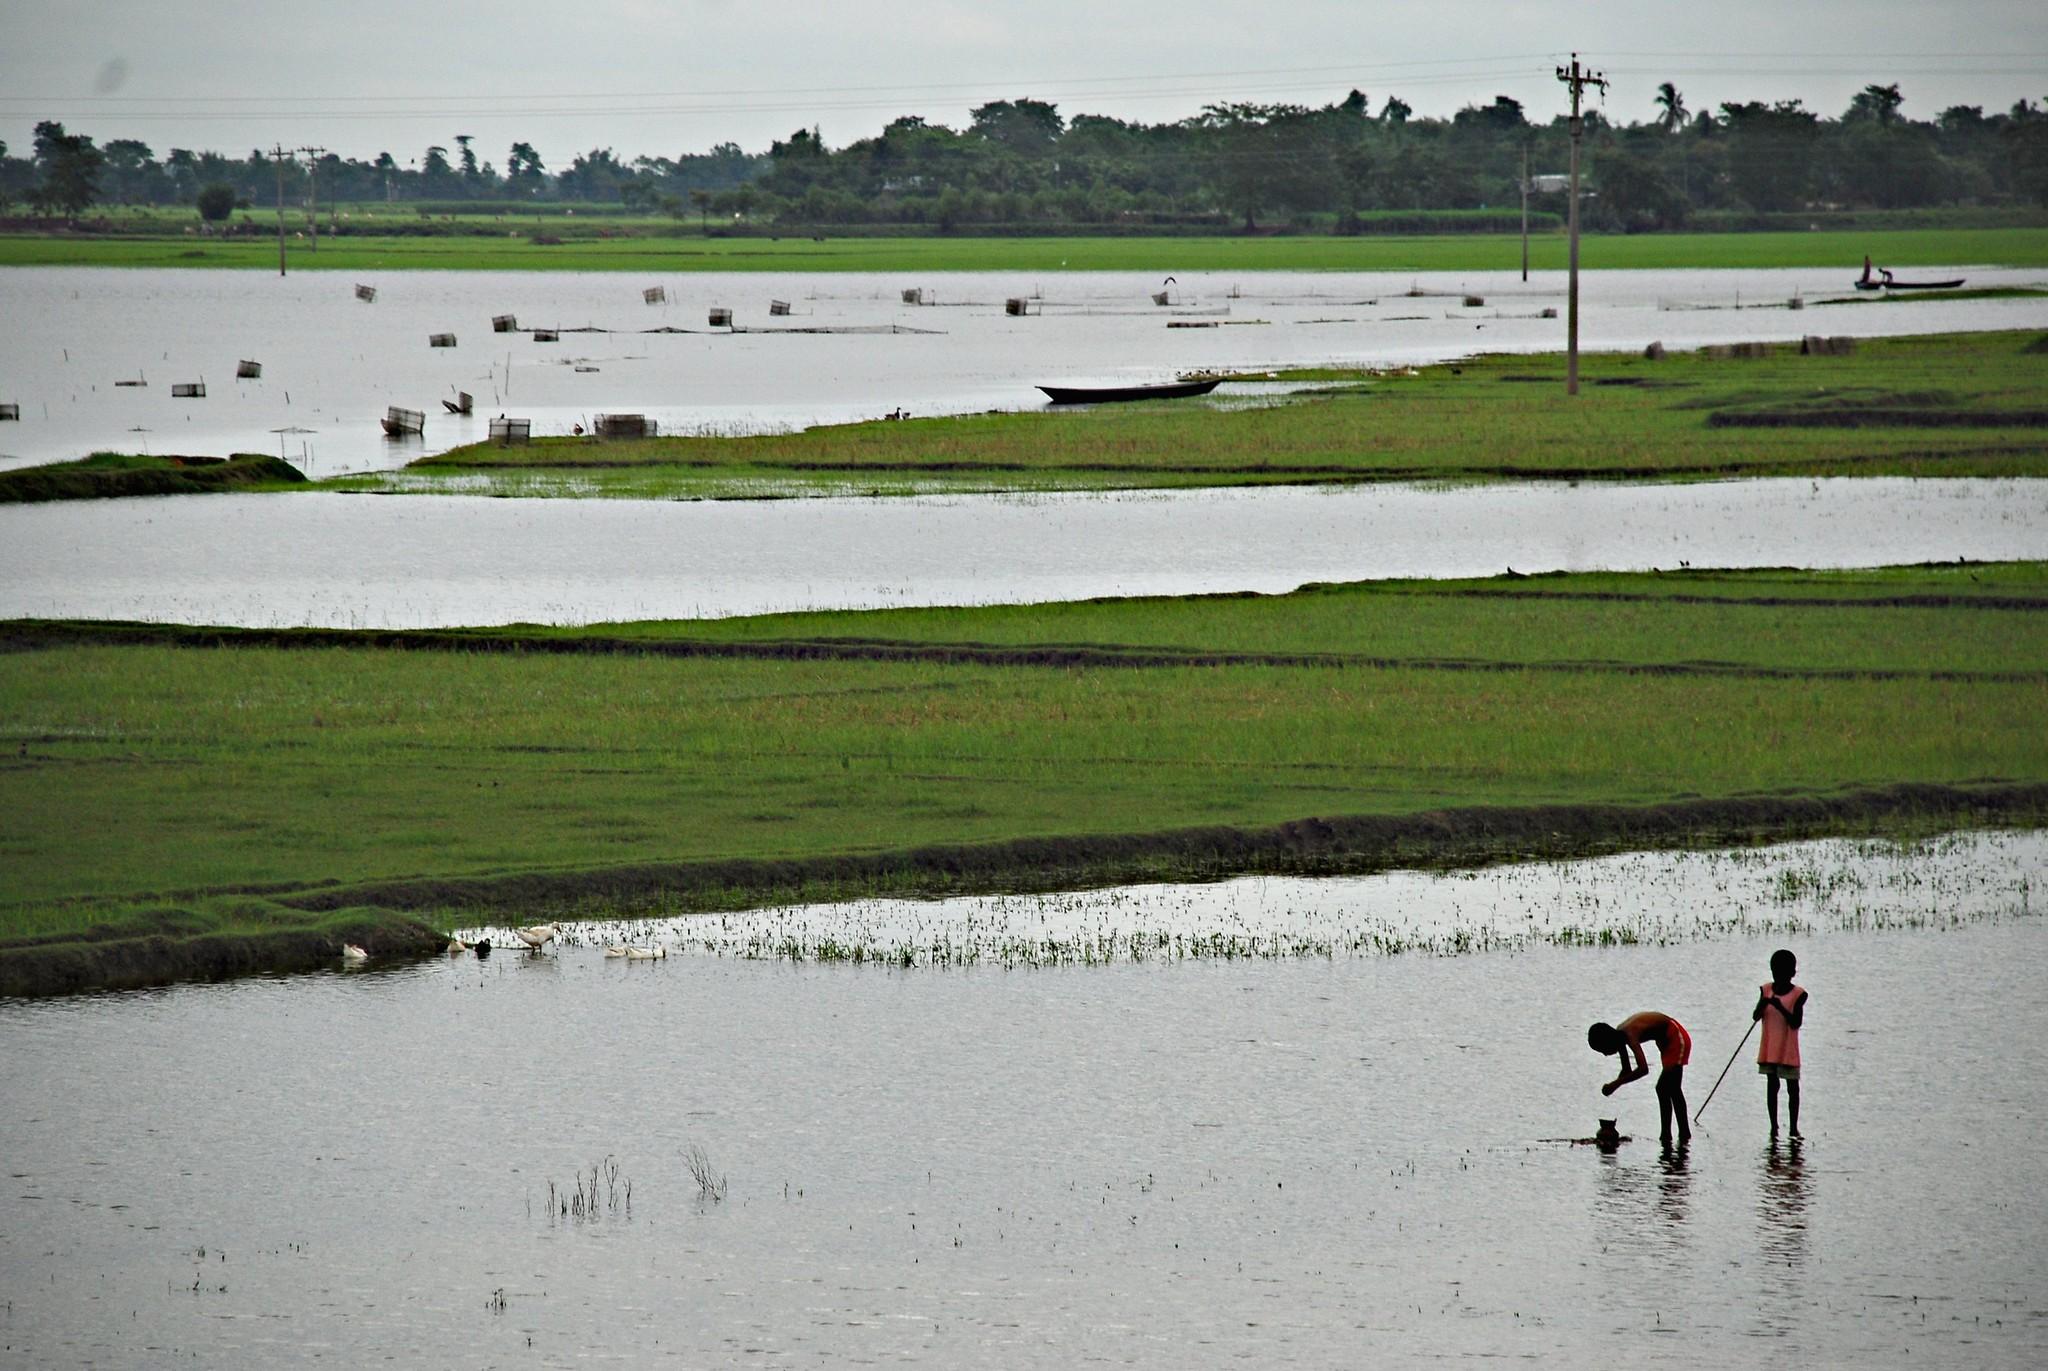 The flooding brought by the monsoon season and tropical cyclones regularly pummels the coastal lands around the Bay of Bengal in Bangladesh. 